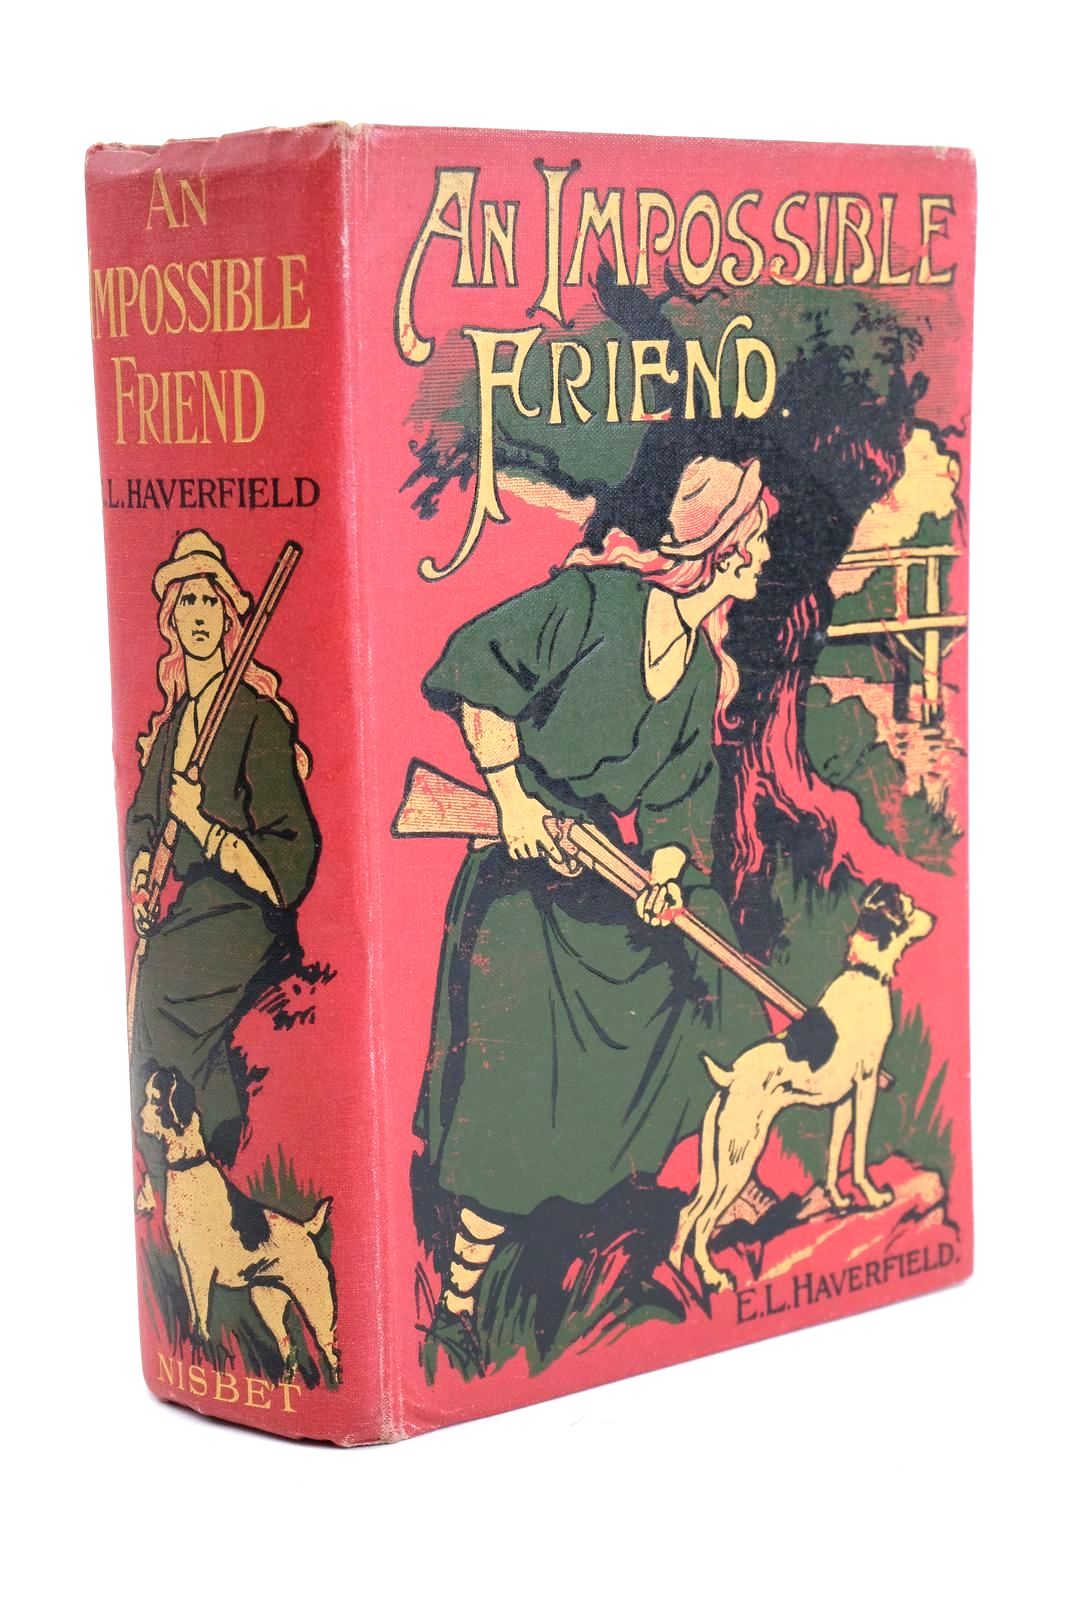 Photo of AN IMPOSSIBLE FRIEND written by Haverfield, E.L. published by James Nisbet & Co. Limited (STOCK CODE: 1324461)  for sale by Stella & Rose's Books